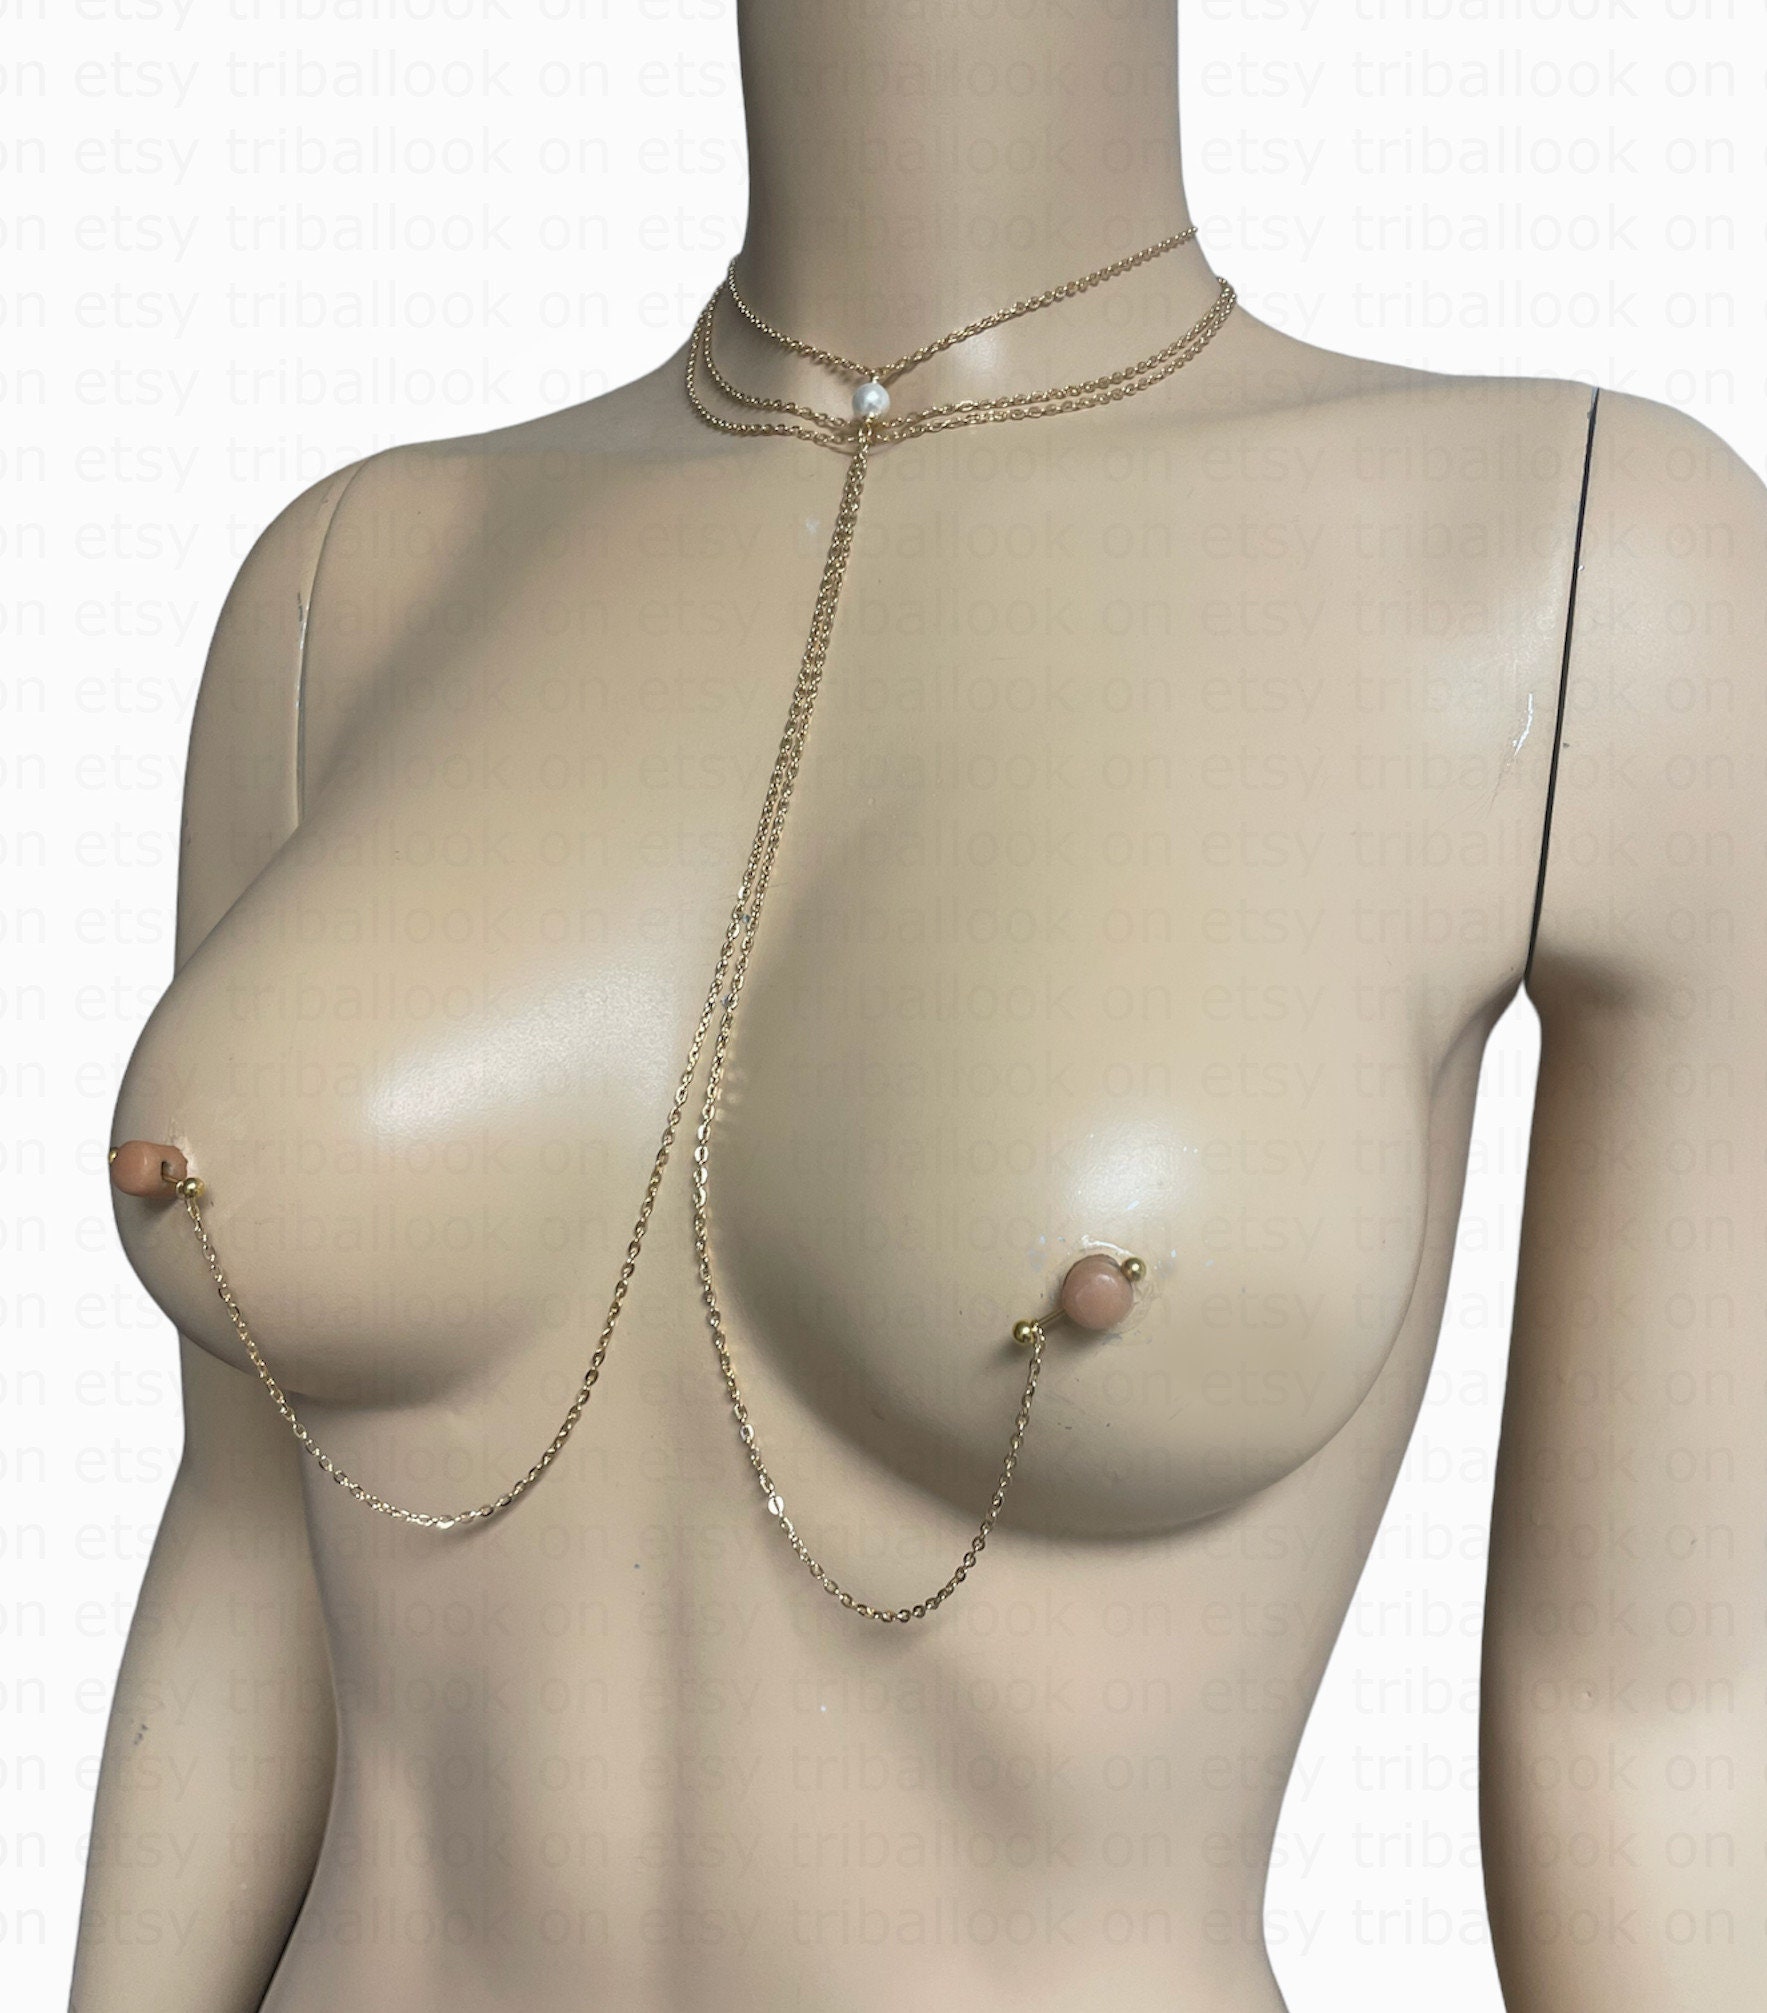 Jewelry for Pierced Nipples With Chains and Freshwater Pearl